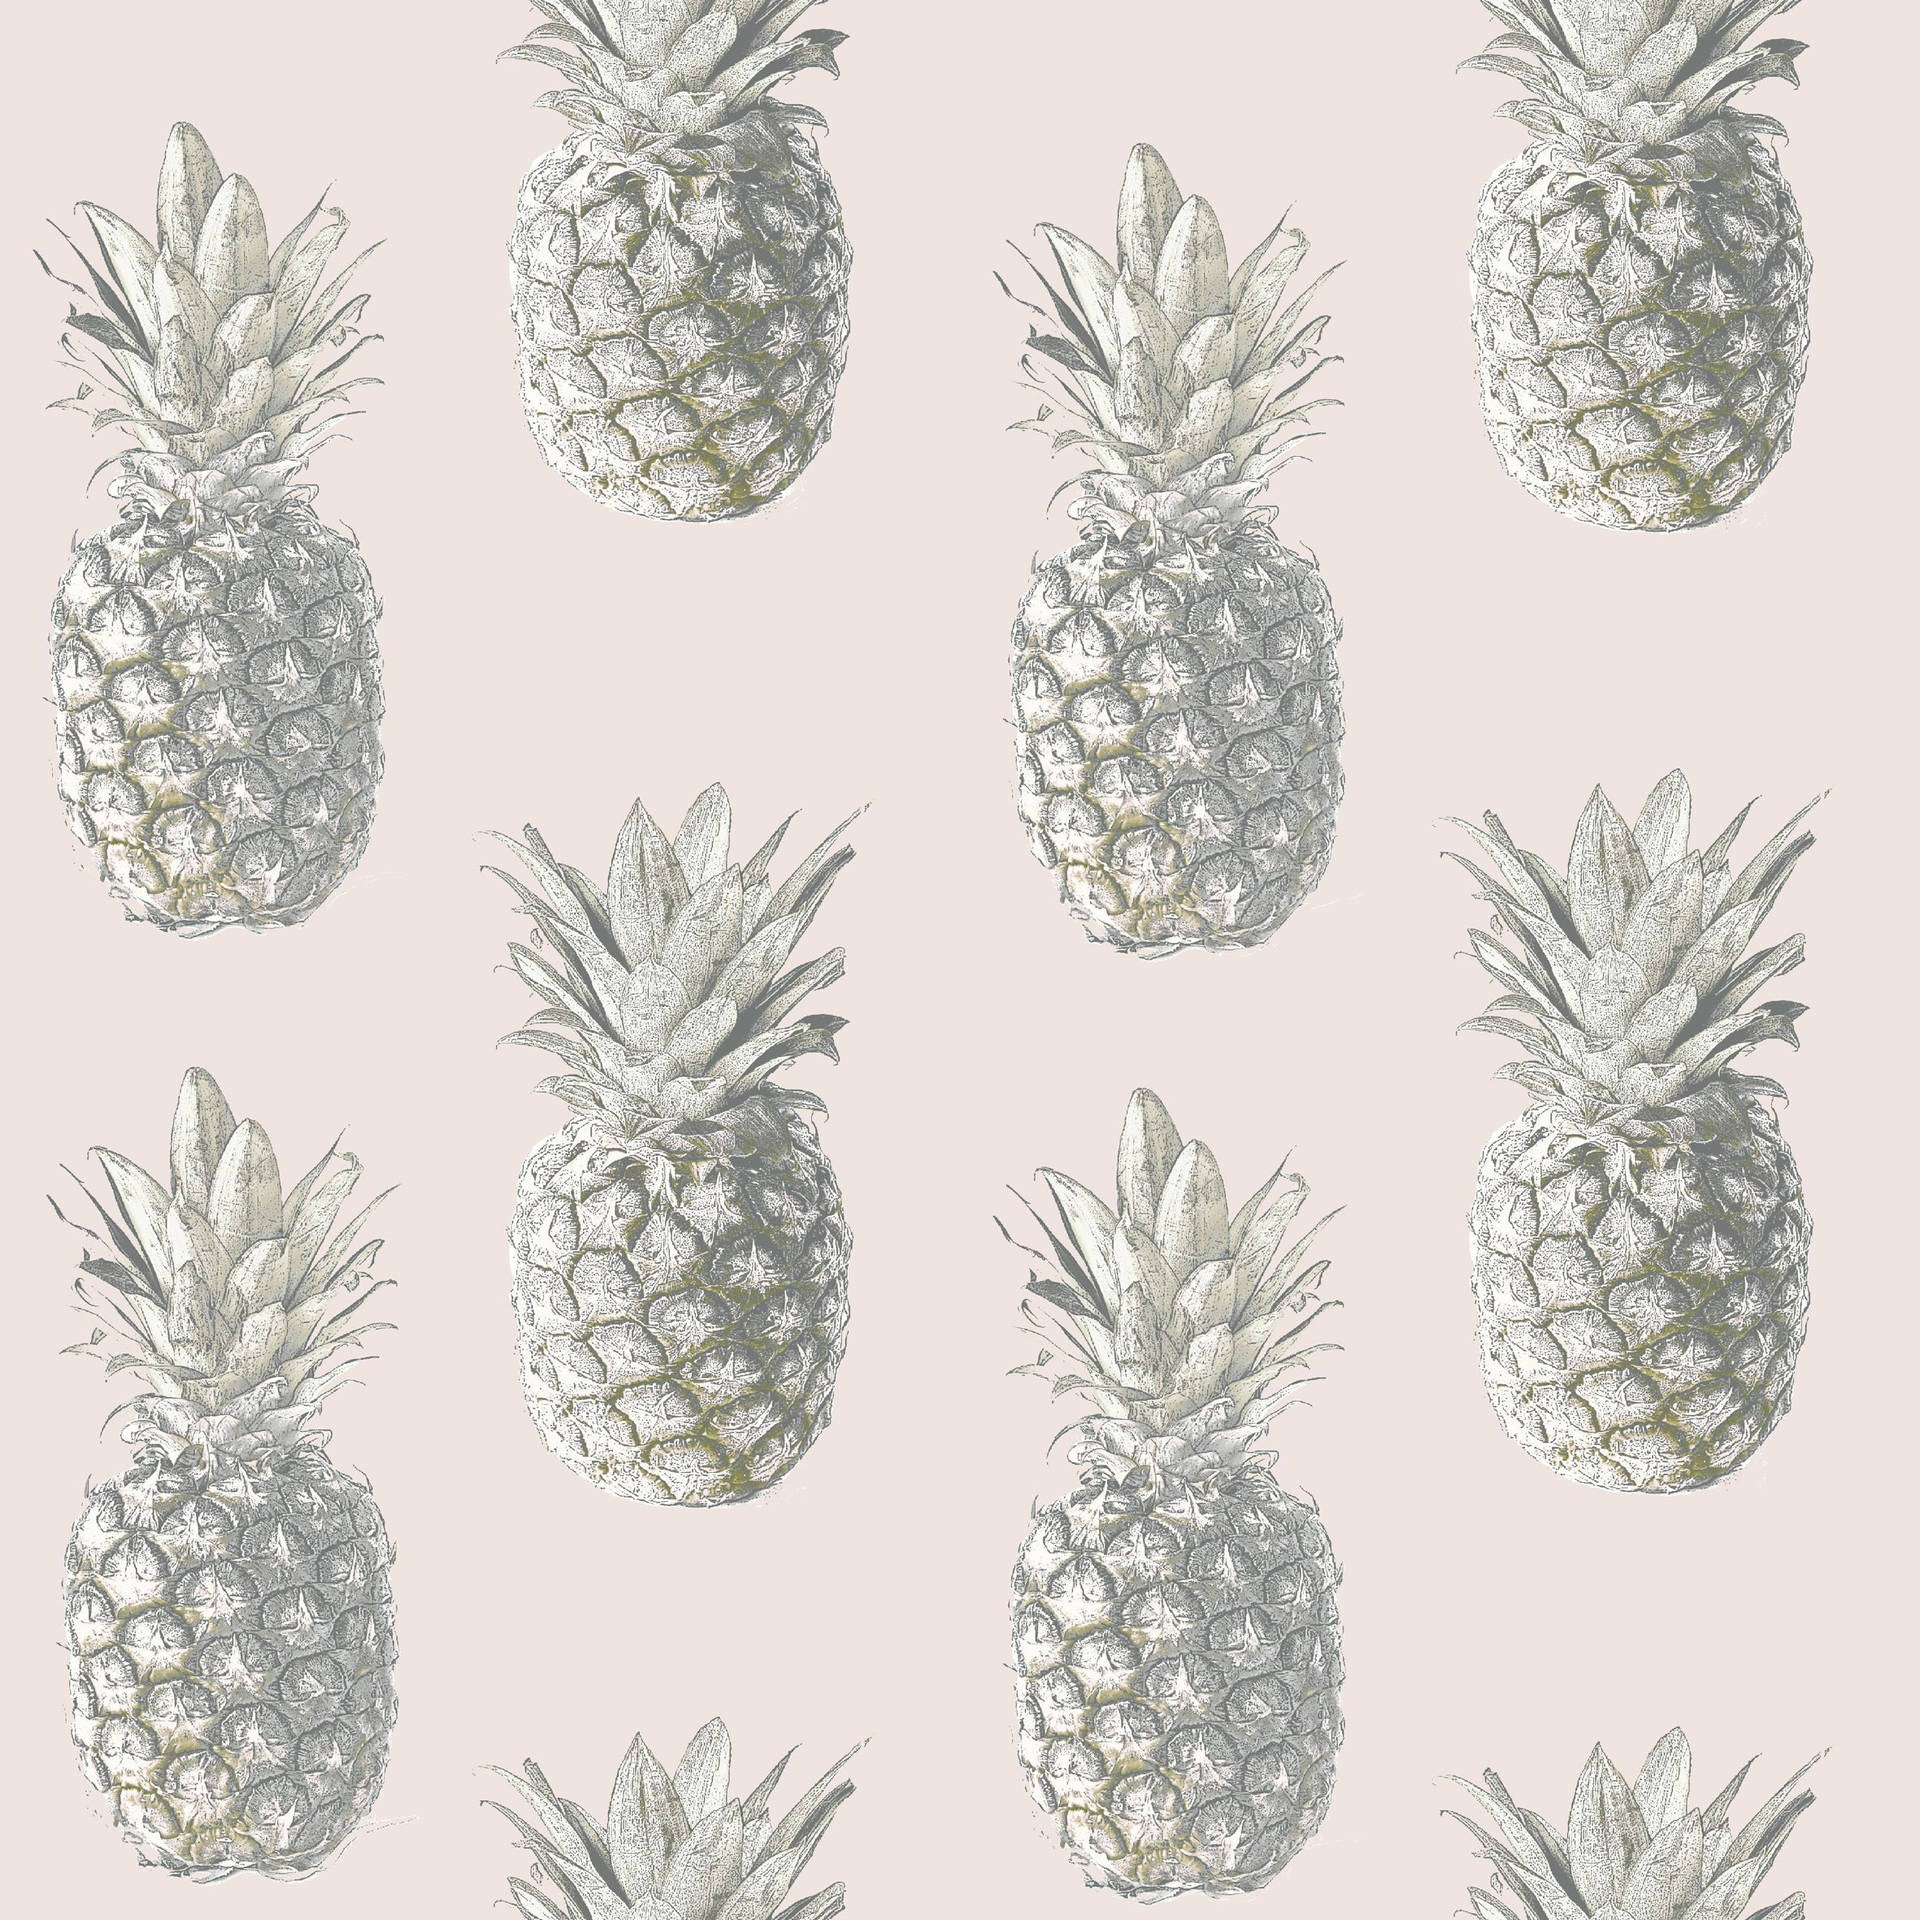 2362X2362 Pineapple Wallpaper and Background